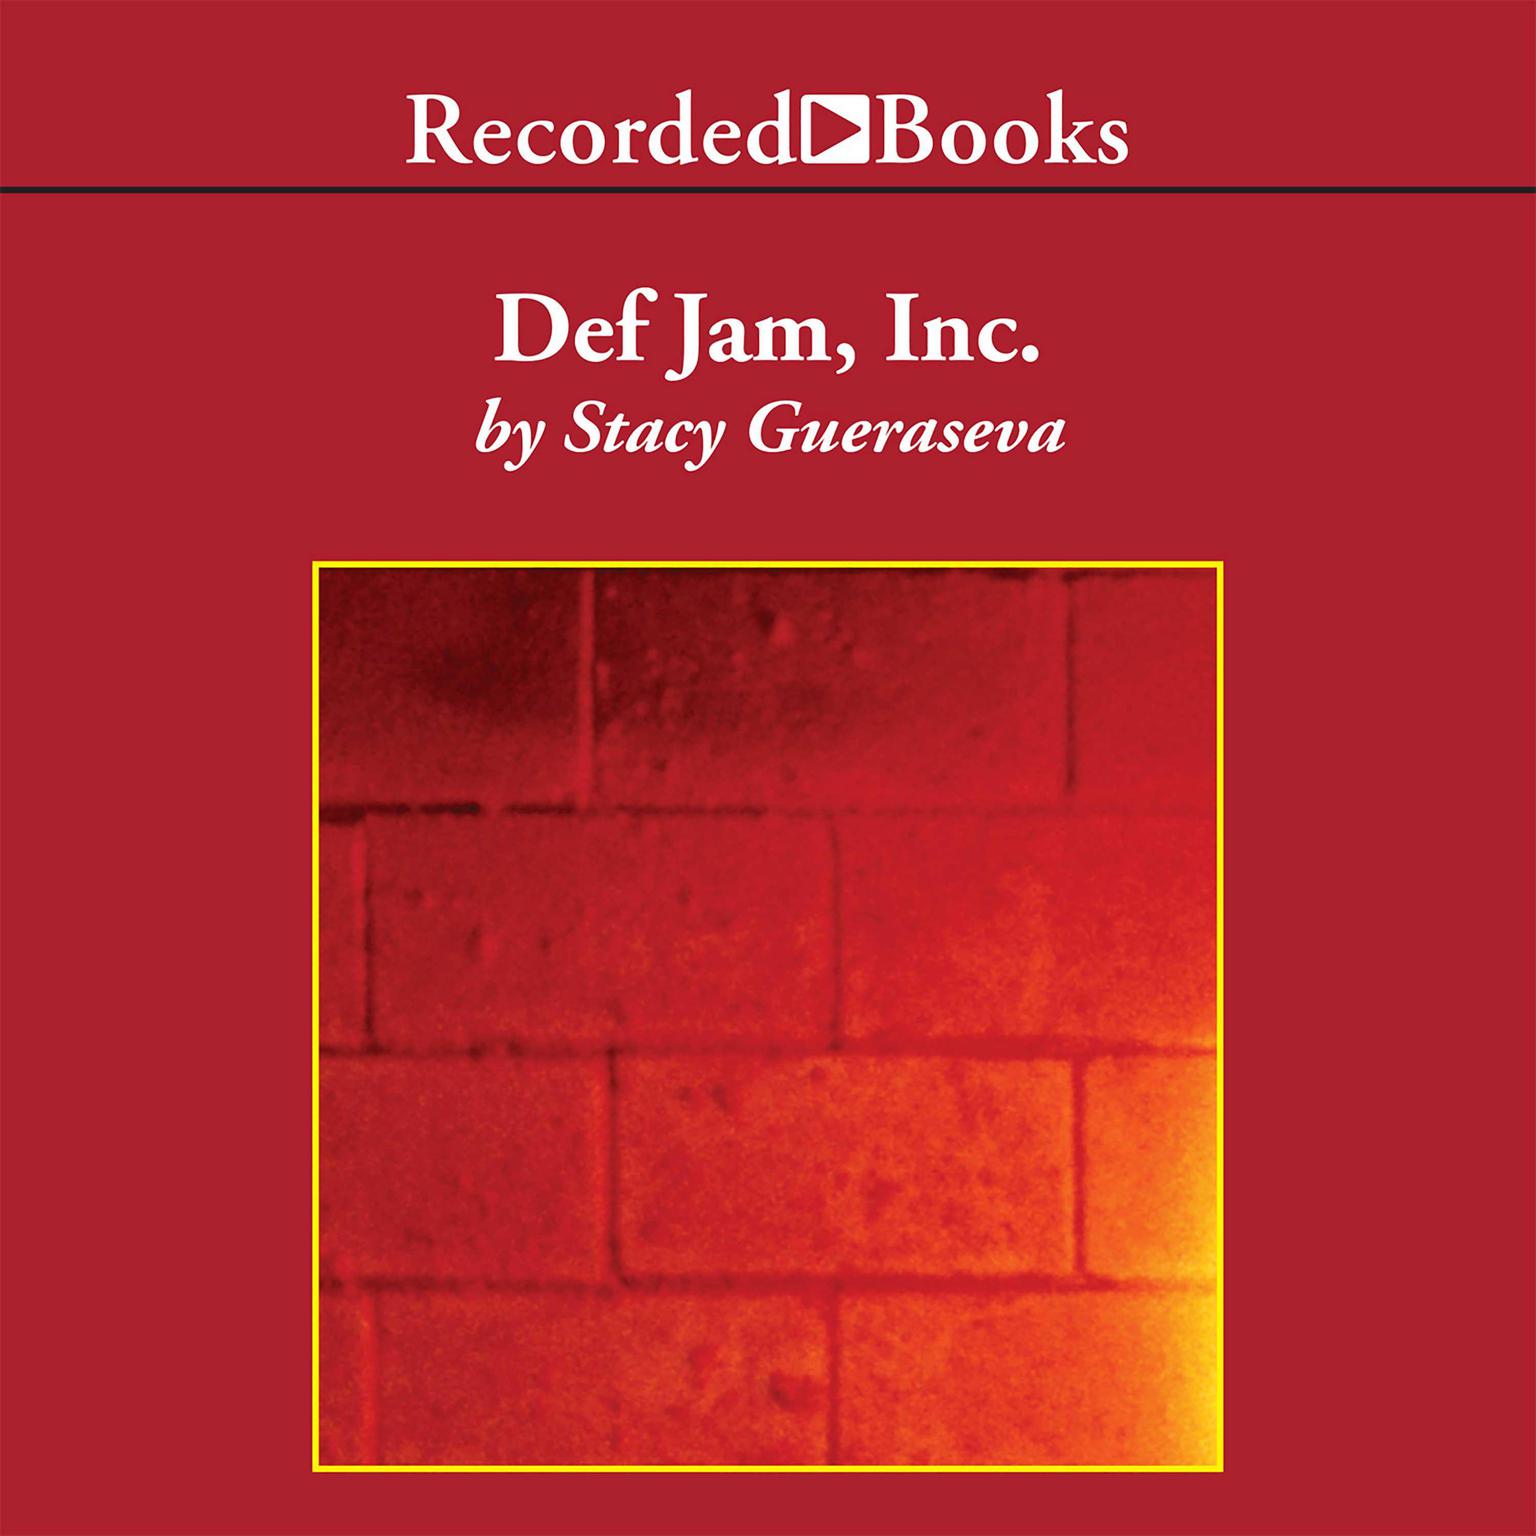 Def Jam, Inc.: Russell Simmons, Rick Rubin, and the Extraordinary Story of the Worlds Most Influential Hip-Hop Label Audiobook, by Stacy Gueraseva